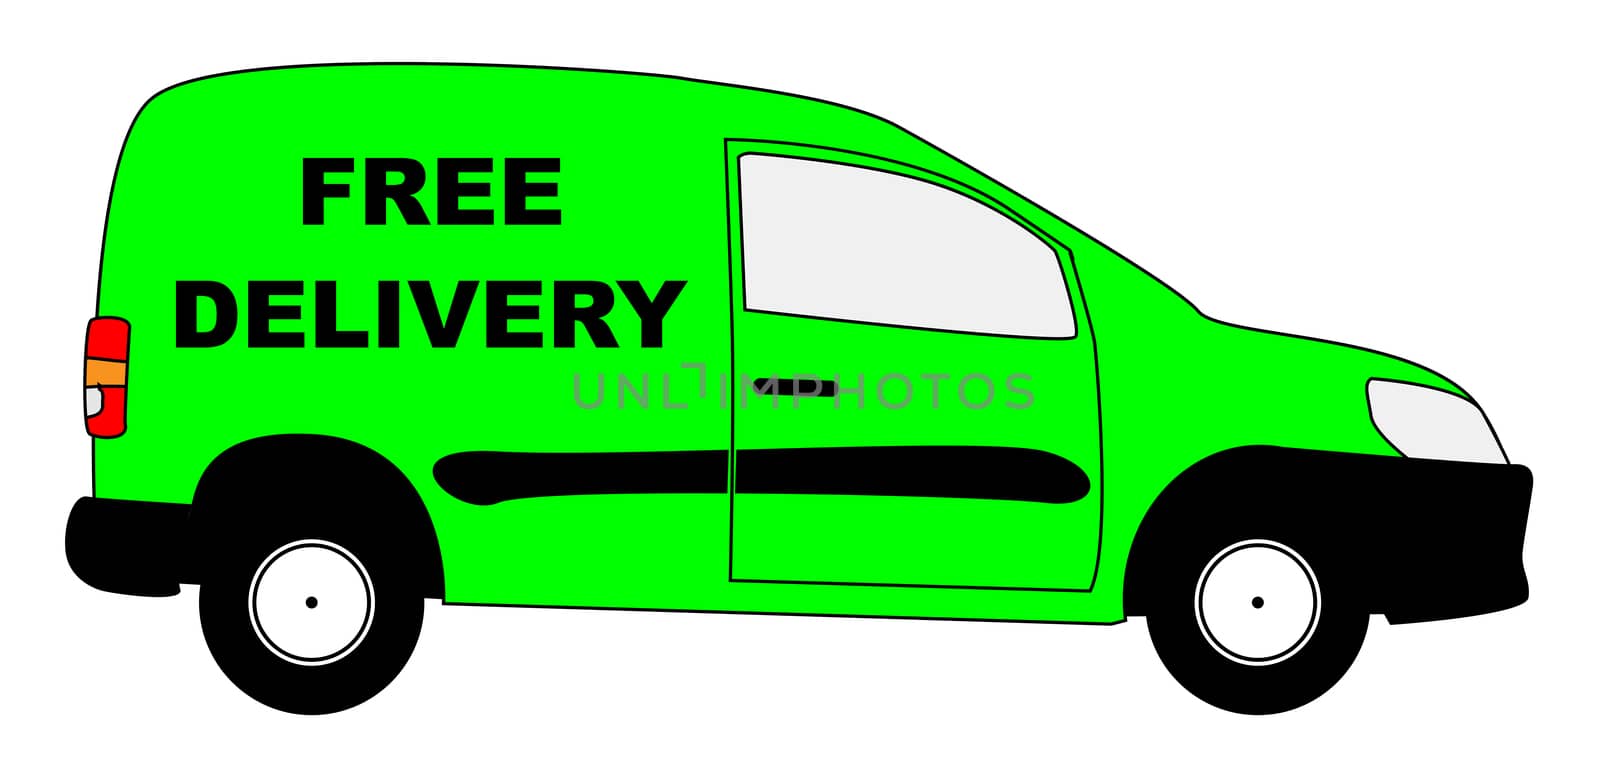 A small delivery van with text FREE DELIVERY isolated on a white background